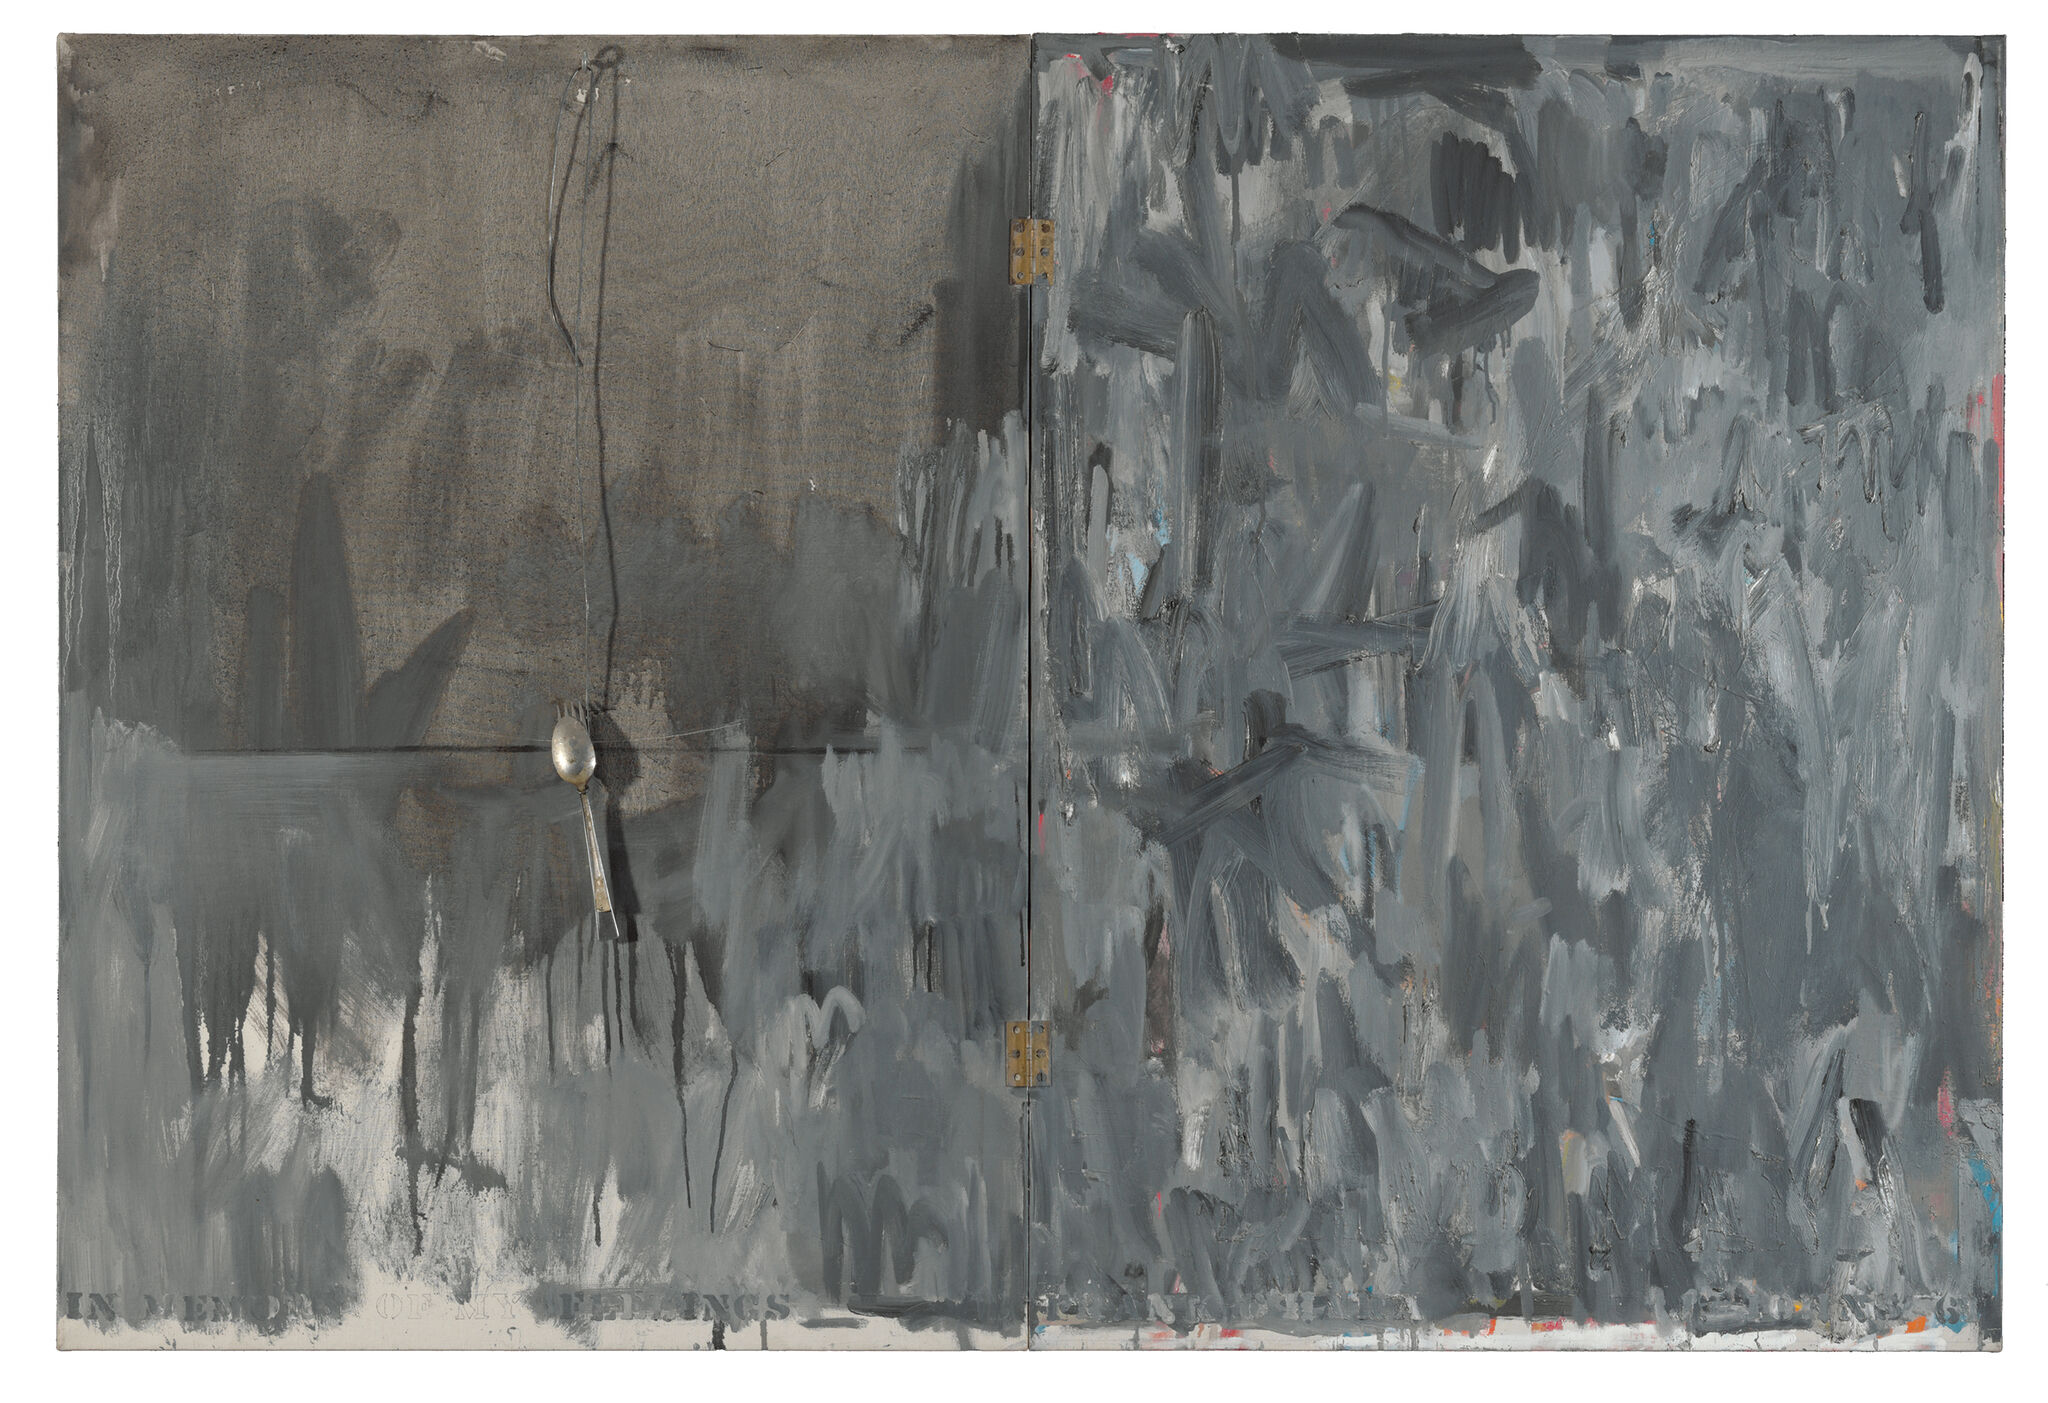 Rectangular composition of gray, sketchy brushstrokes, bisected in half vertically by a thin black line and two hinges; the left half of the composition is bisected horizontally, with the top half painted in a warmer gray, and with a fork and spoon hung by a string pinned to the top of the left side of the painting.